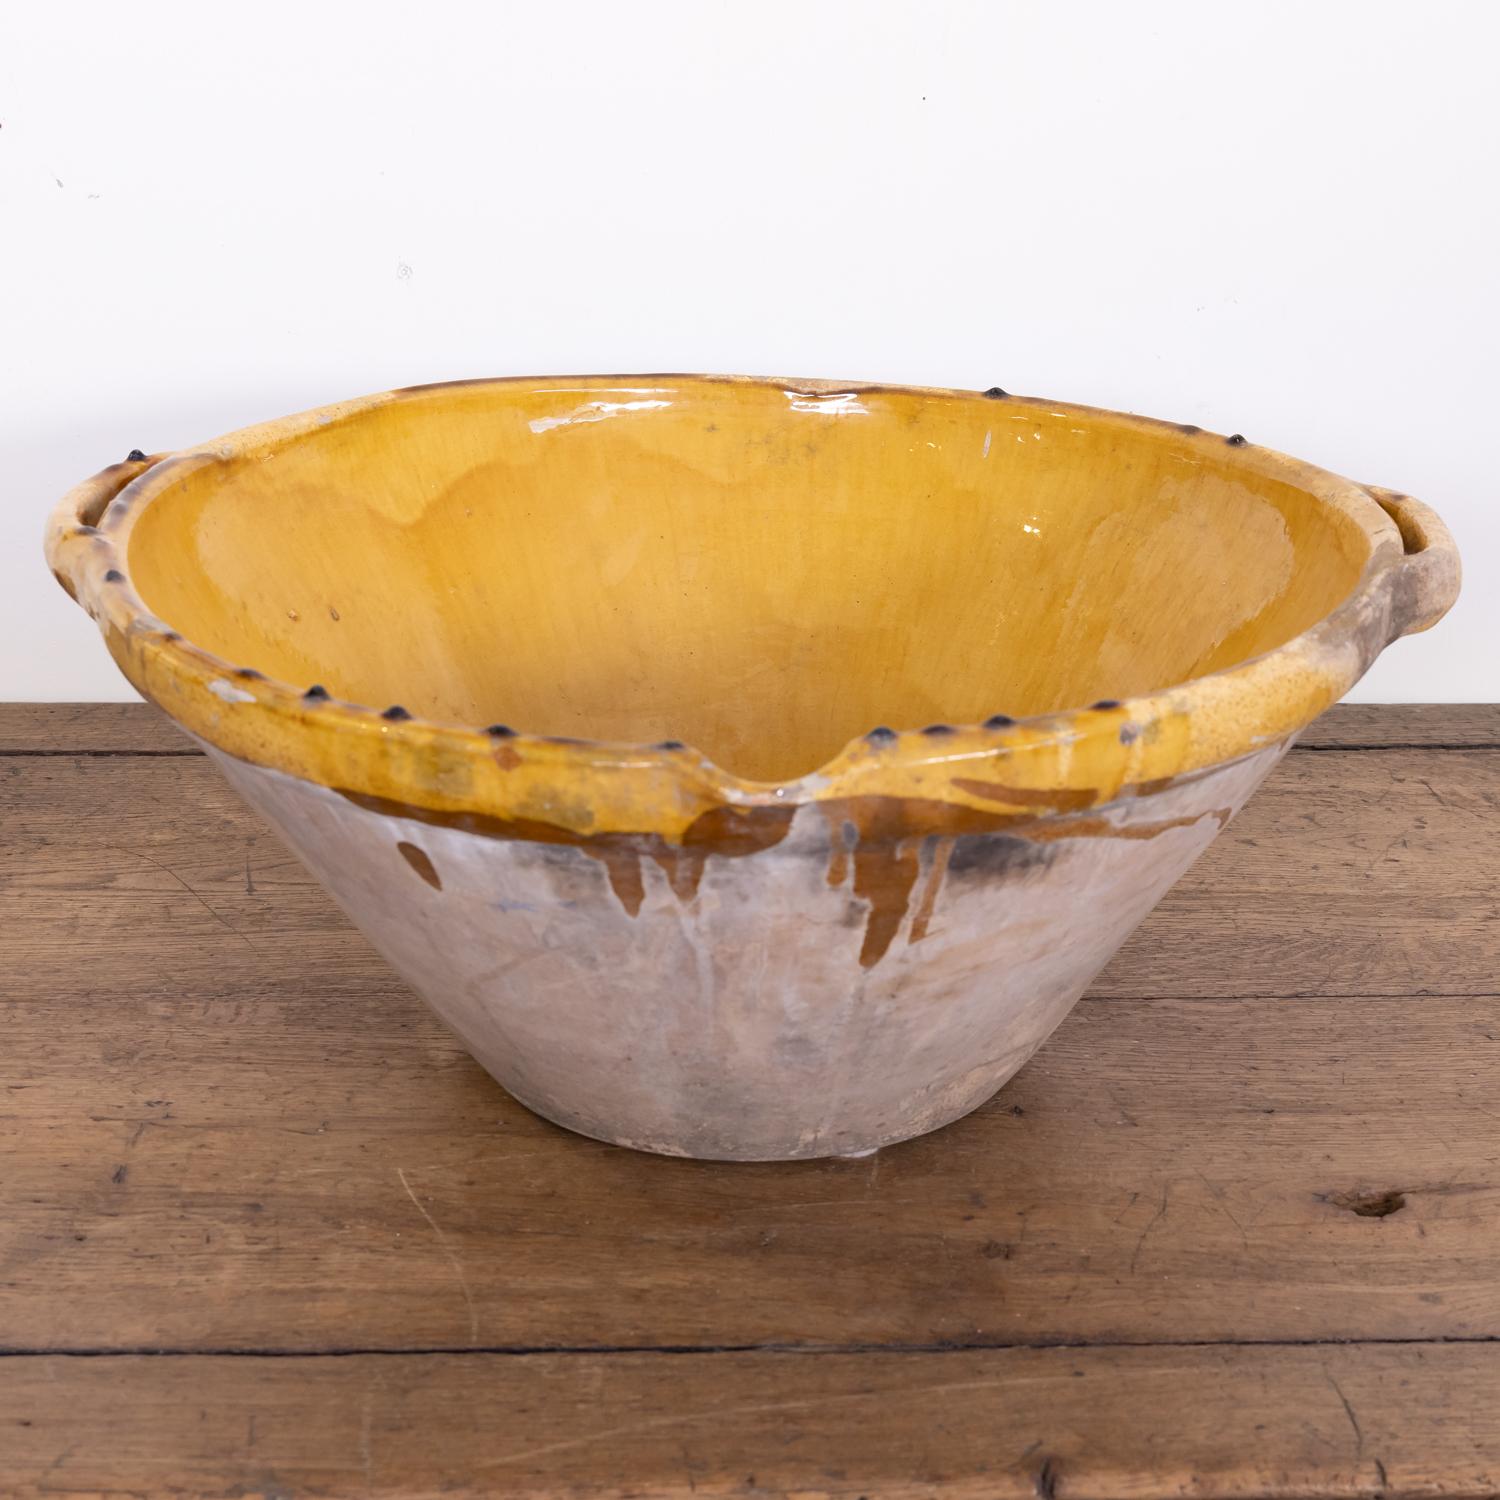 A large 19th century French terracotta tian bowl complete with both handles and pouring spout having an unglazed exterior and a beautiful mustard yellow glaze to the interior and lip, circa 1870s. Earthernware tian bowls like this are considered